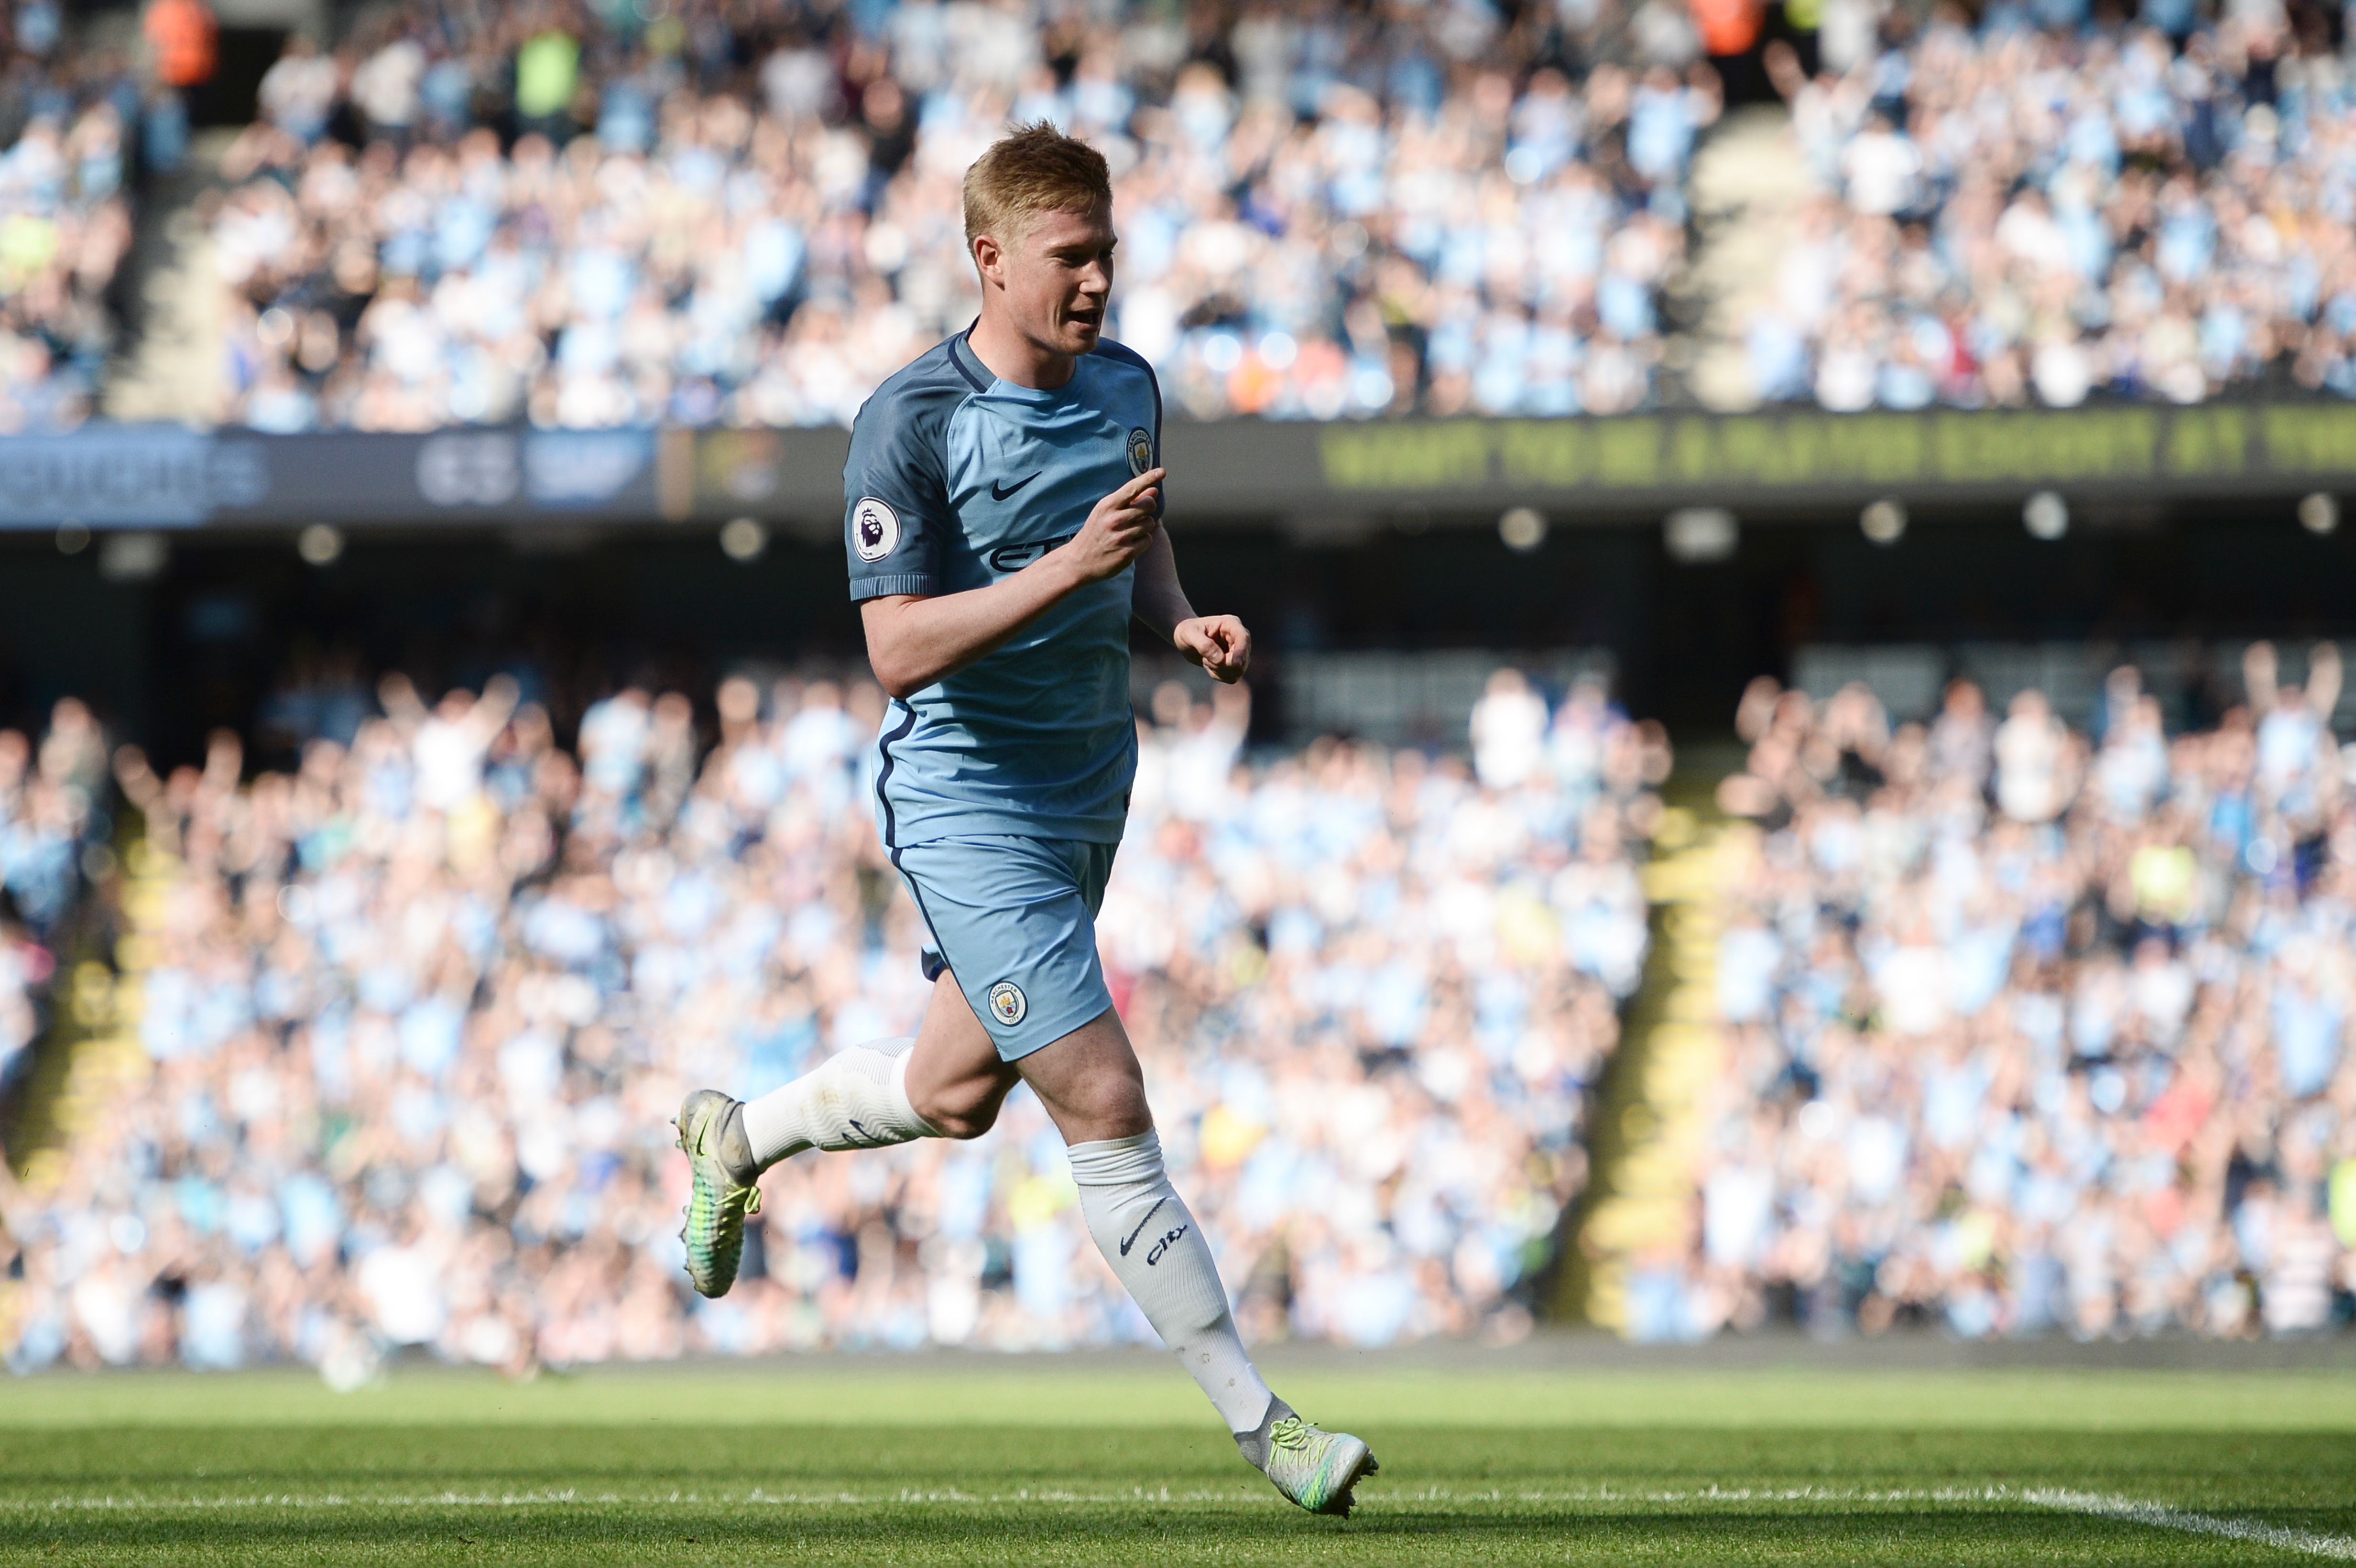 Manchester City's Belgian midfielder Kevin De Bruyne celebrates scoring the opening goal during the English Premier League football match between Manchester City and Bournemouth at the Etihad Stadium in Manchester, north west England, on September 17, 2016. / AFP / OLI SCARFF / RESTRICTED TO EDITORIAL USE. No use with unauthorized audio, video, data, fixture lists, club/league logos or 'live' services. Online in-match use limited to 75 images, no video emulation. No use in betting, games or single club/league/player publications.  /         (Photo credit should read OLI SCARFF/AFP/Getty Images)